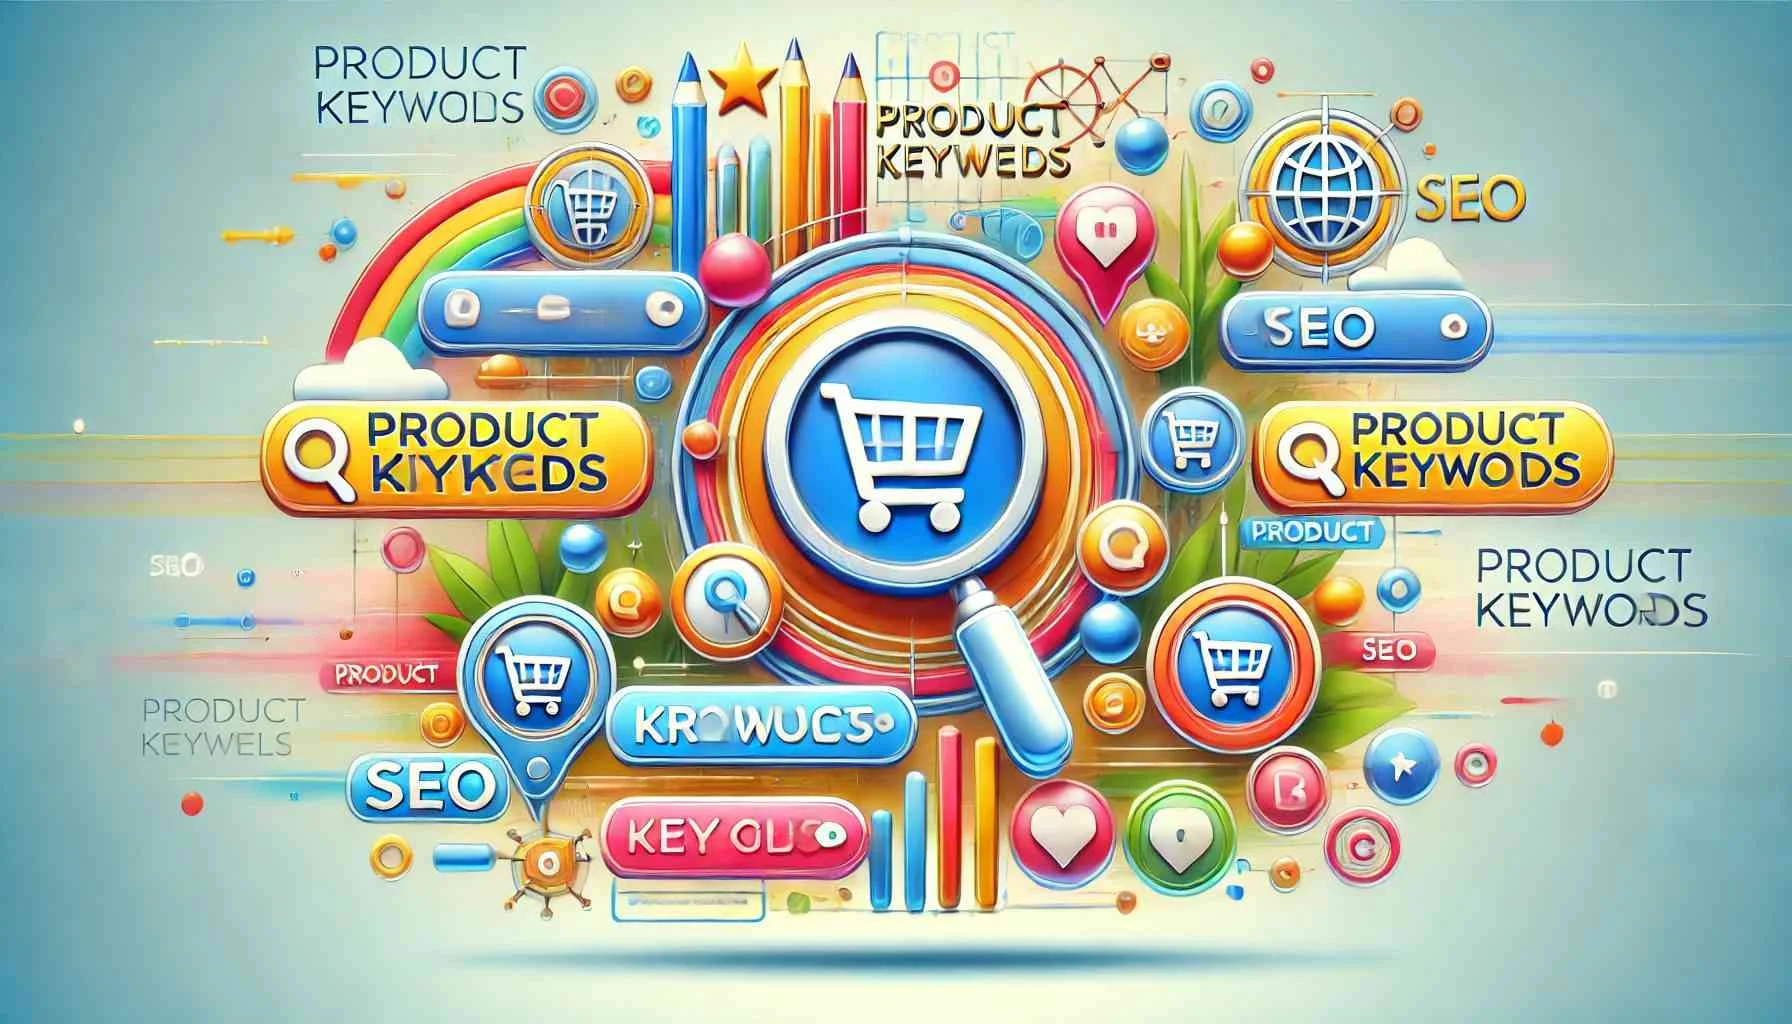 Themed Illustration Depicting The Concept Of Product Keywords. The Image Should Use Vibrant And Modern Colors With 20240714